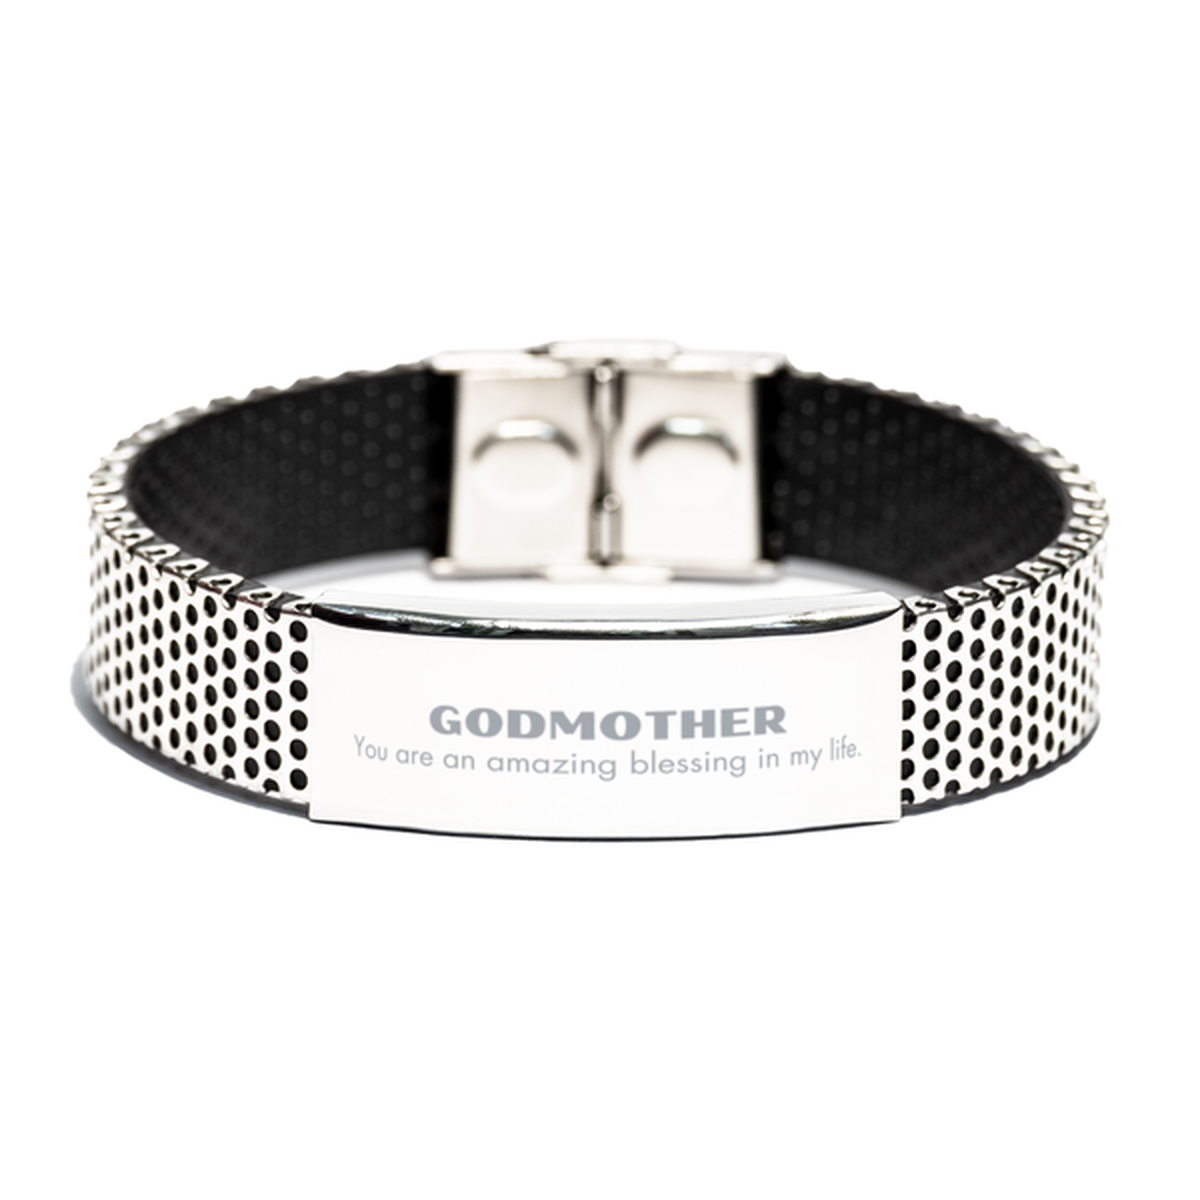 Godmother Stainless Steel Bracelet, You are an amazing blessing in my life, Thank You Gifts For Godmother, Inspirational Birthday Christmas Unique Gifts For Godmother